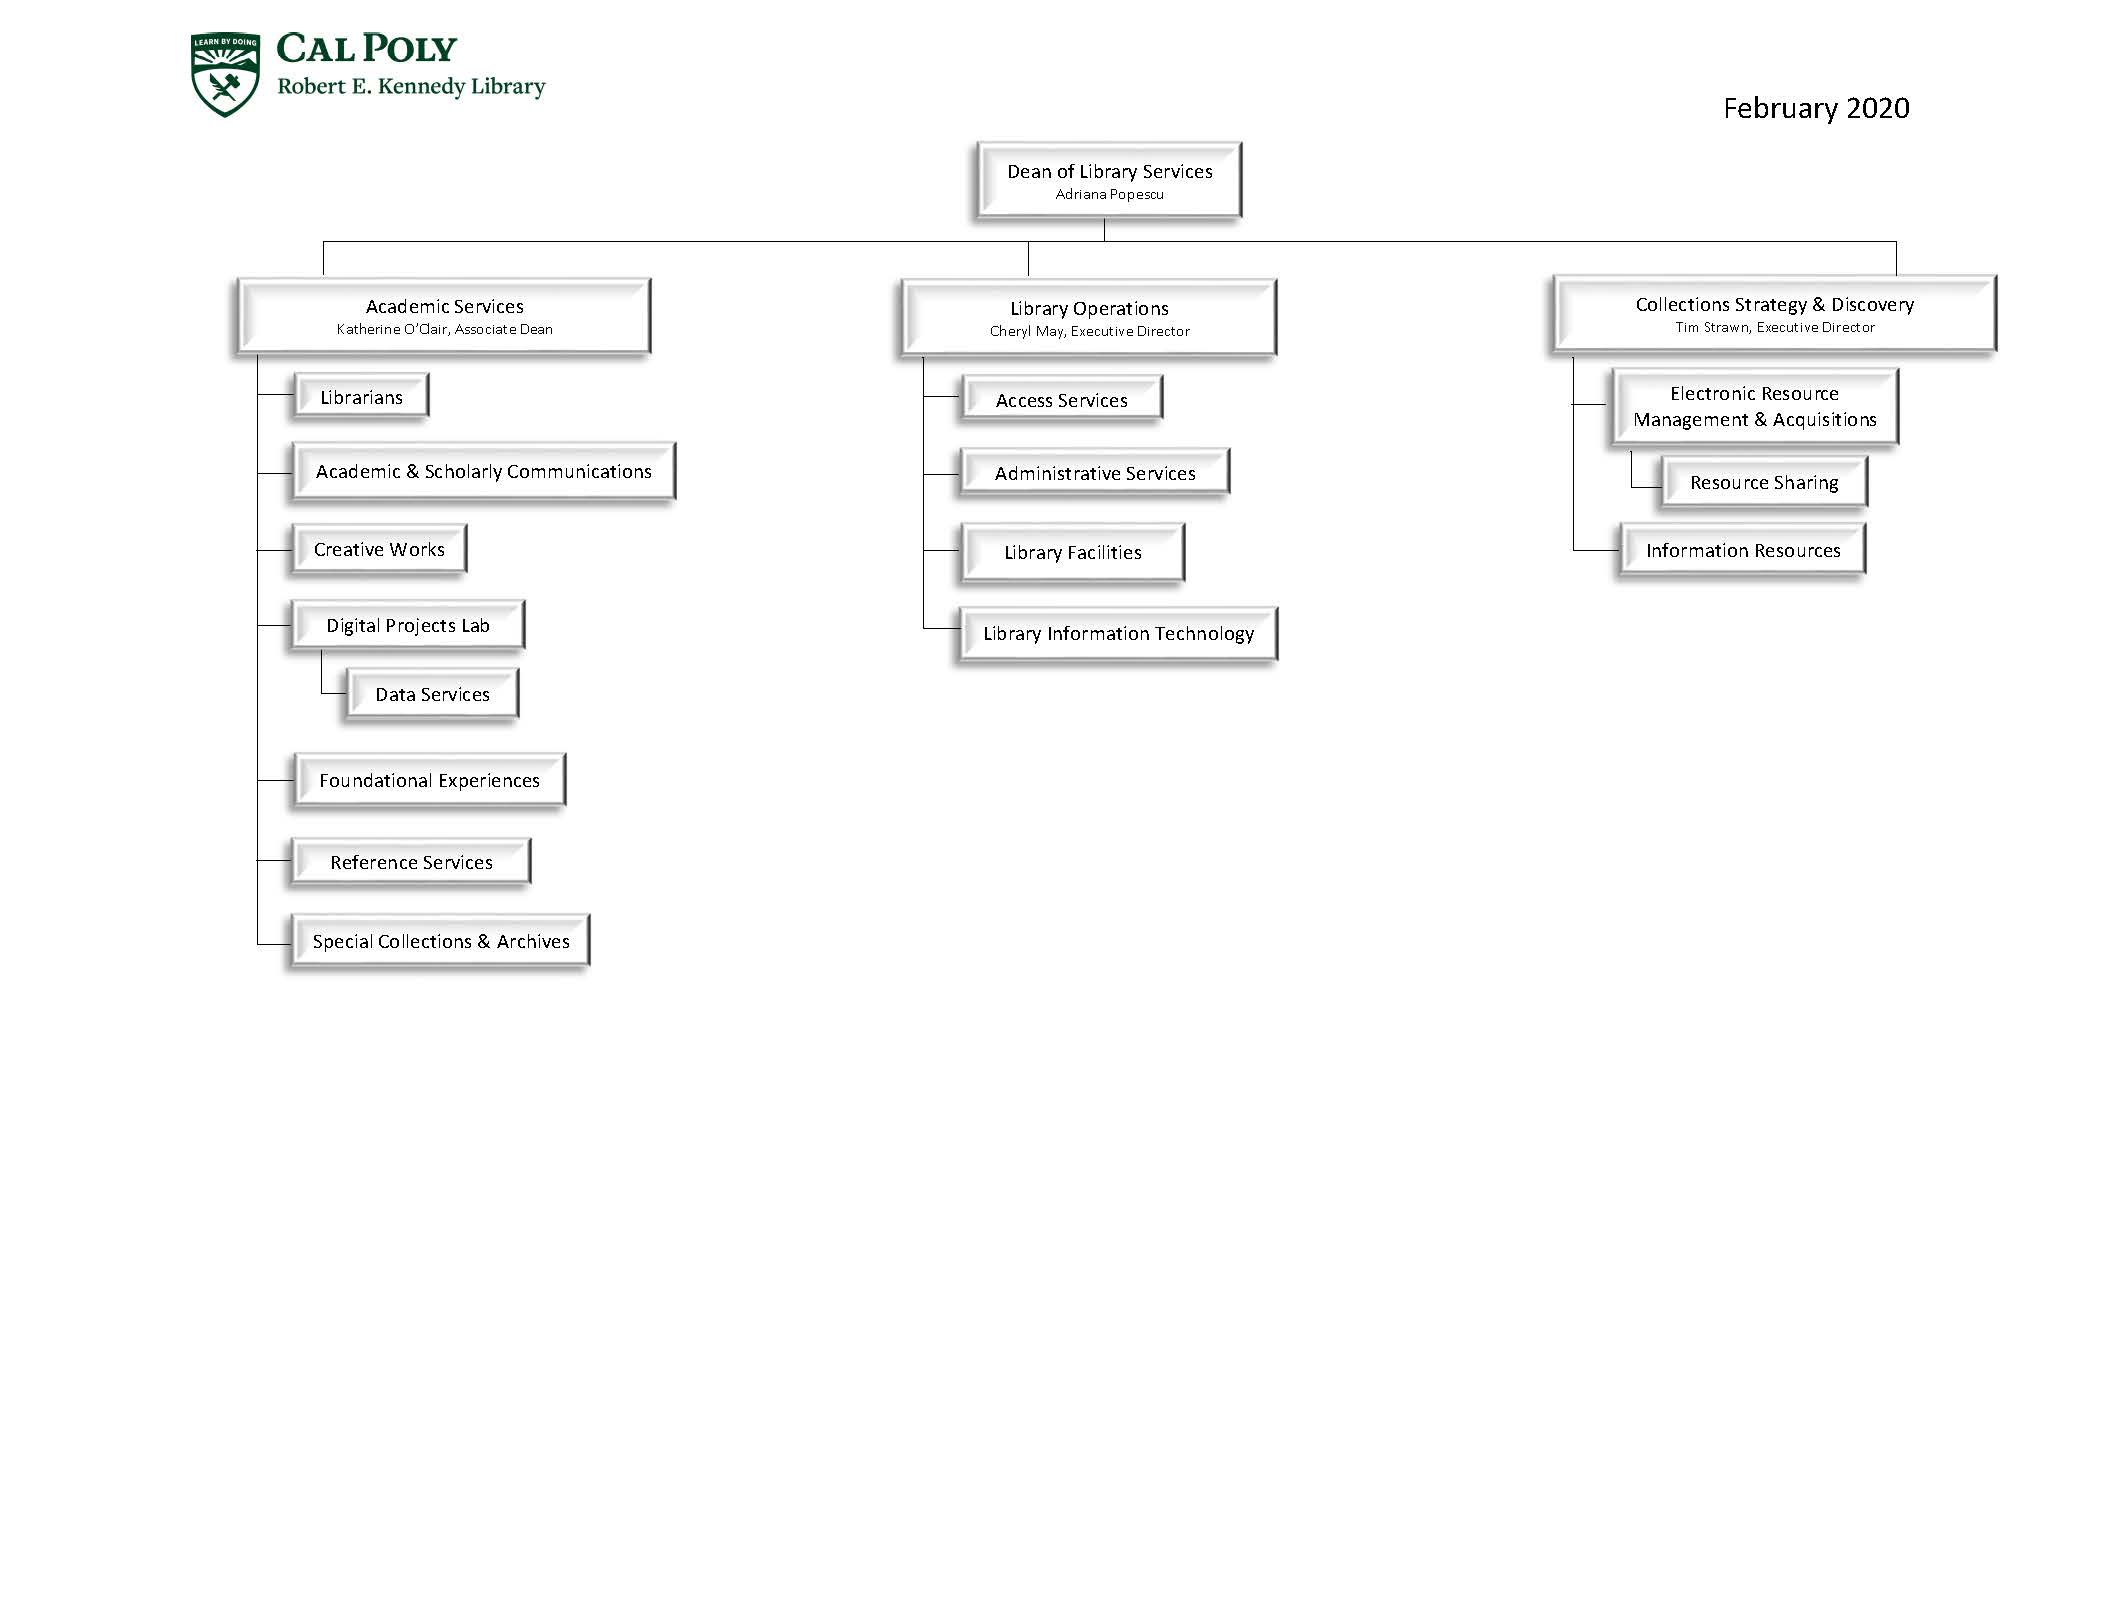 02.2020 Library Org Chart_Page_1